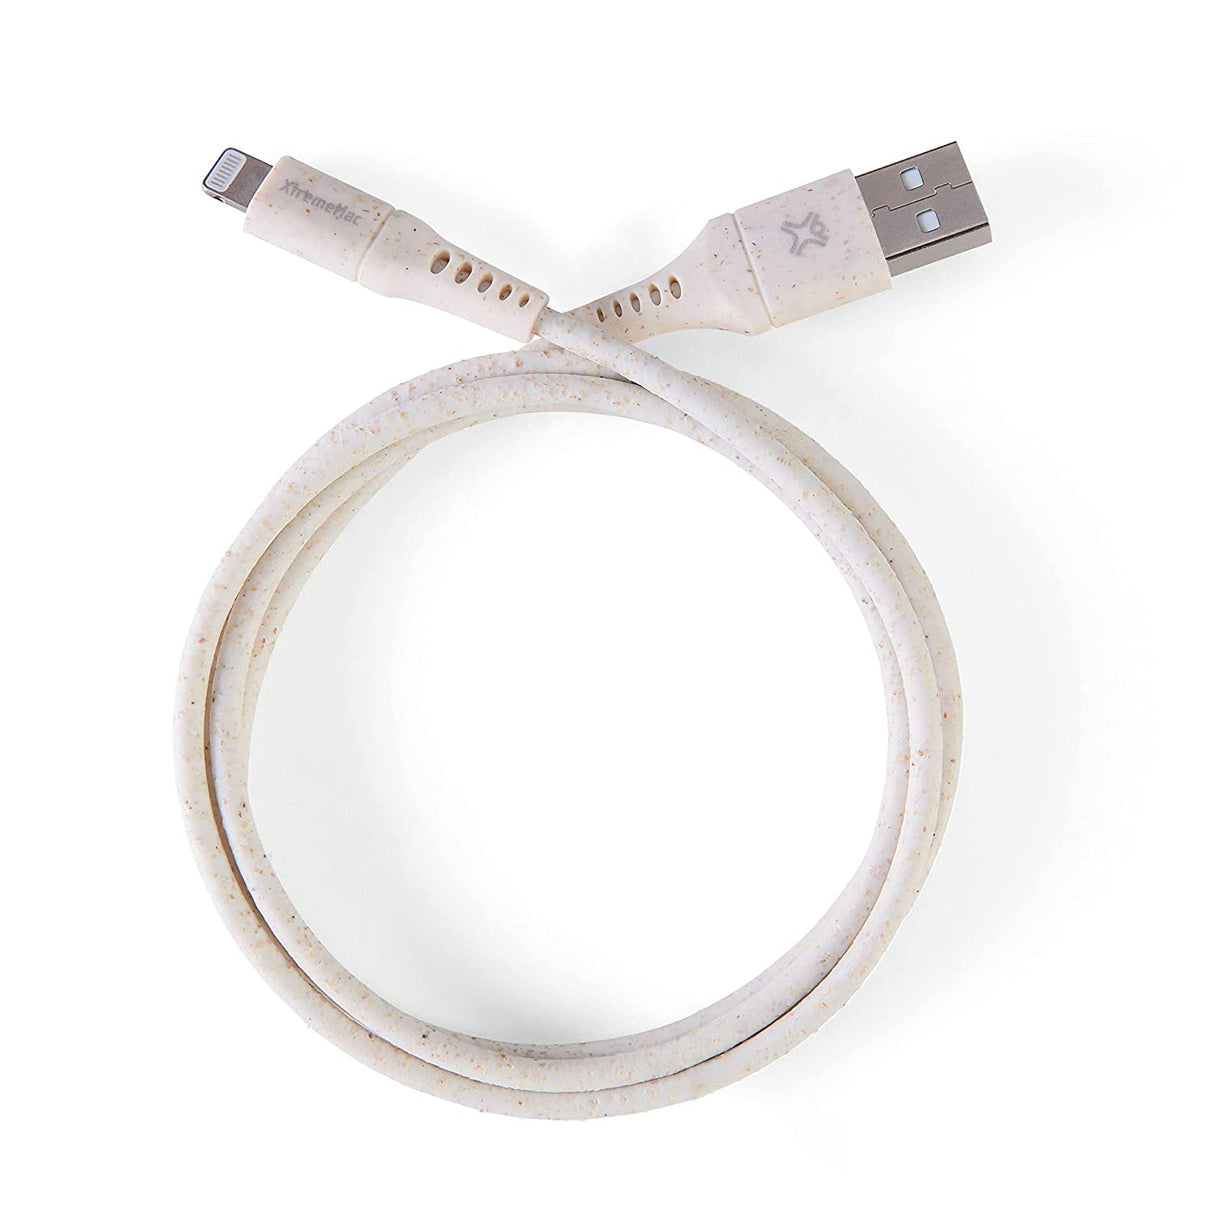 XtremeMac Eco Lightning to USB-A Cable – 39 in. White